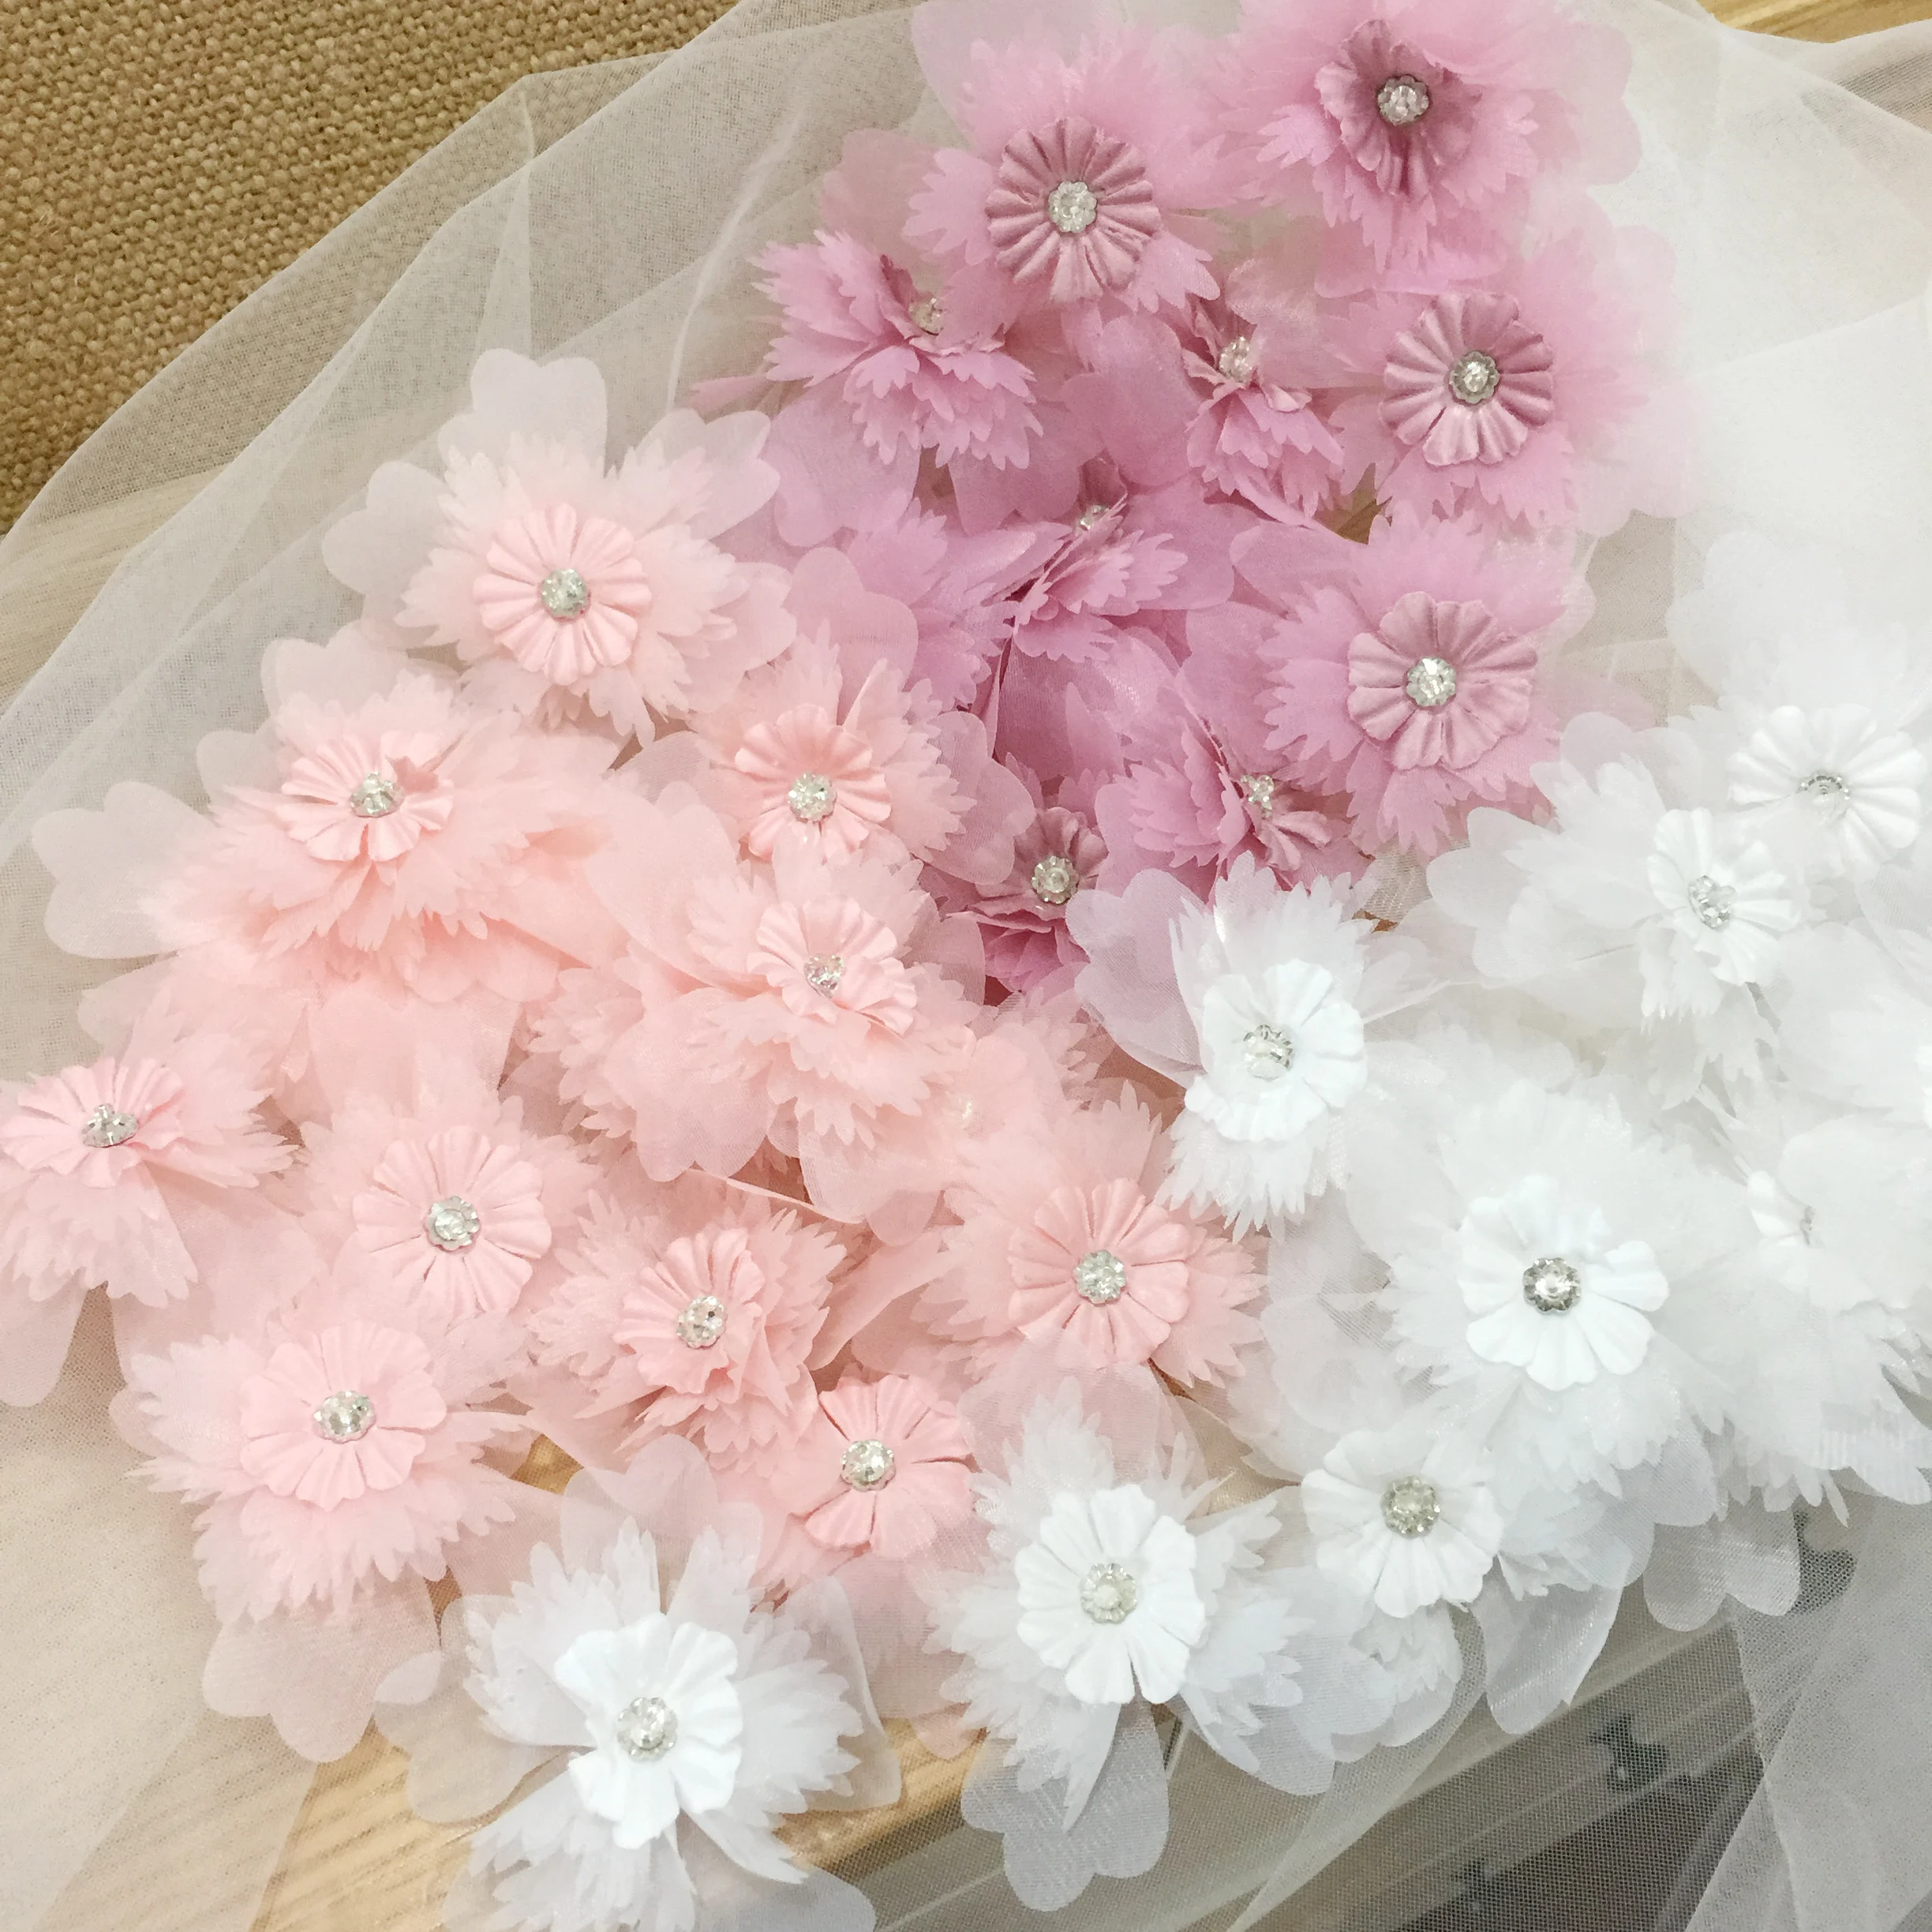 YYCRAFT 5 Yards 2.5 3D Chiffon Flower Lace Trims Bridal Bouquets Cluster Flower DIY Sewing Moss 